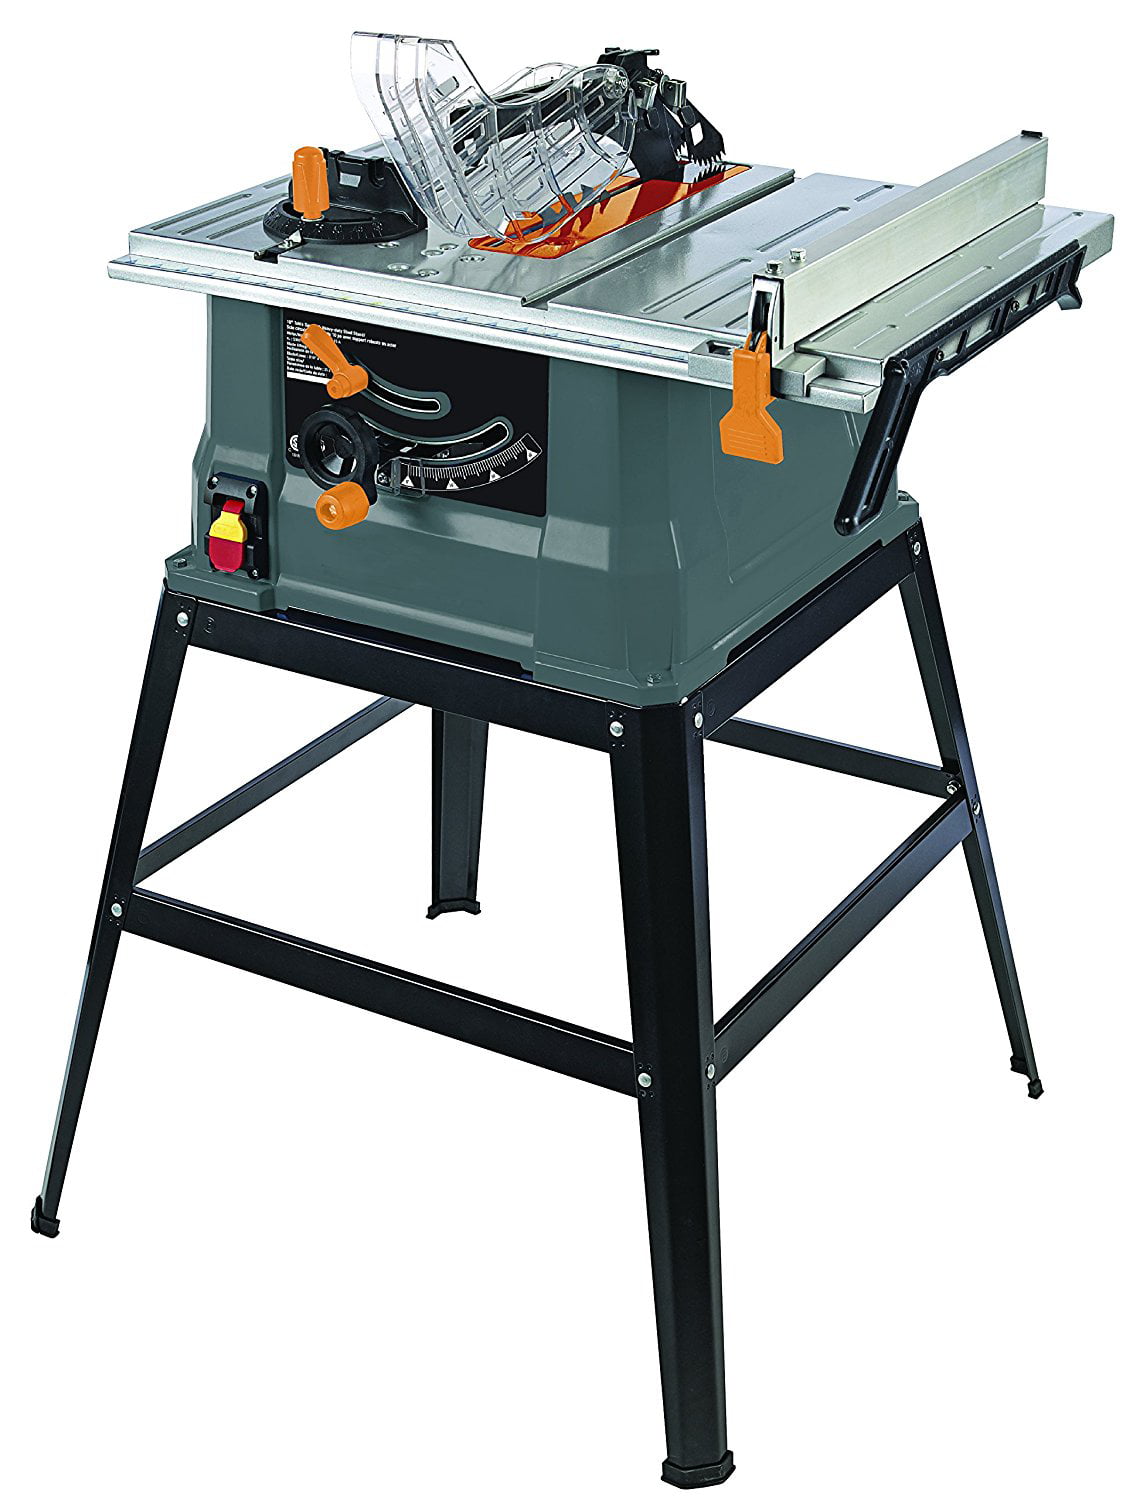 Truepower 10 Inch 15amp Table Saw W Steel Stand